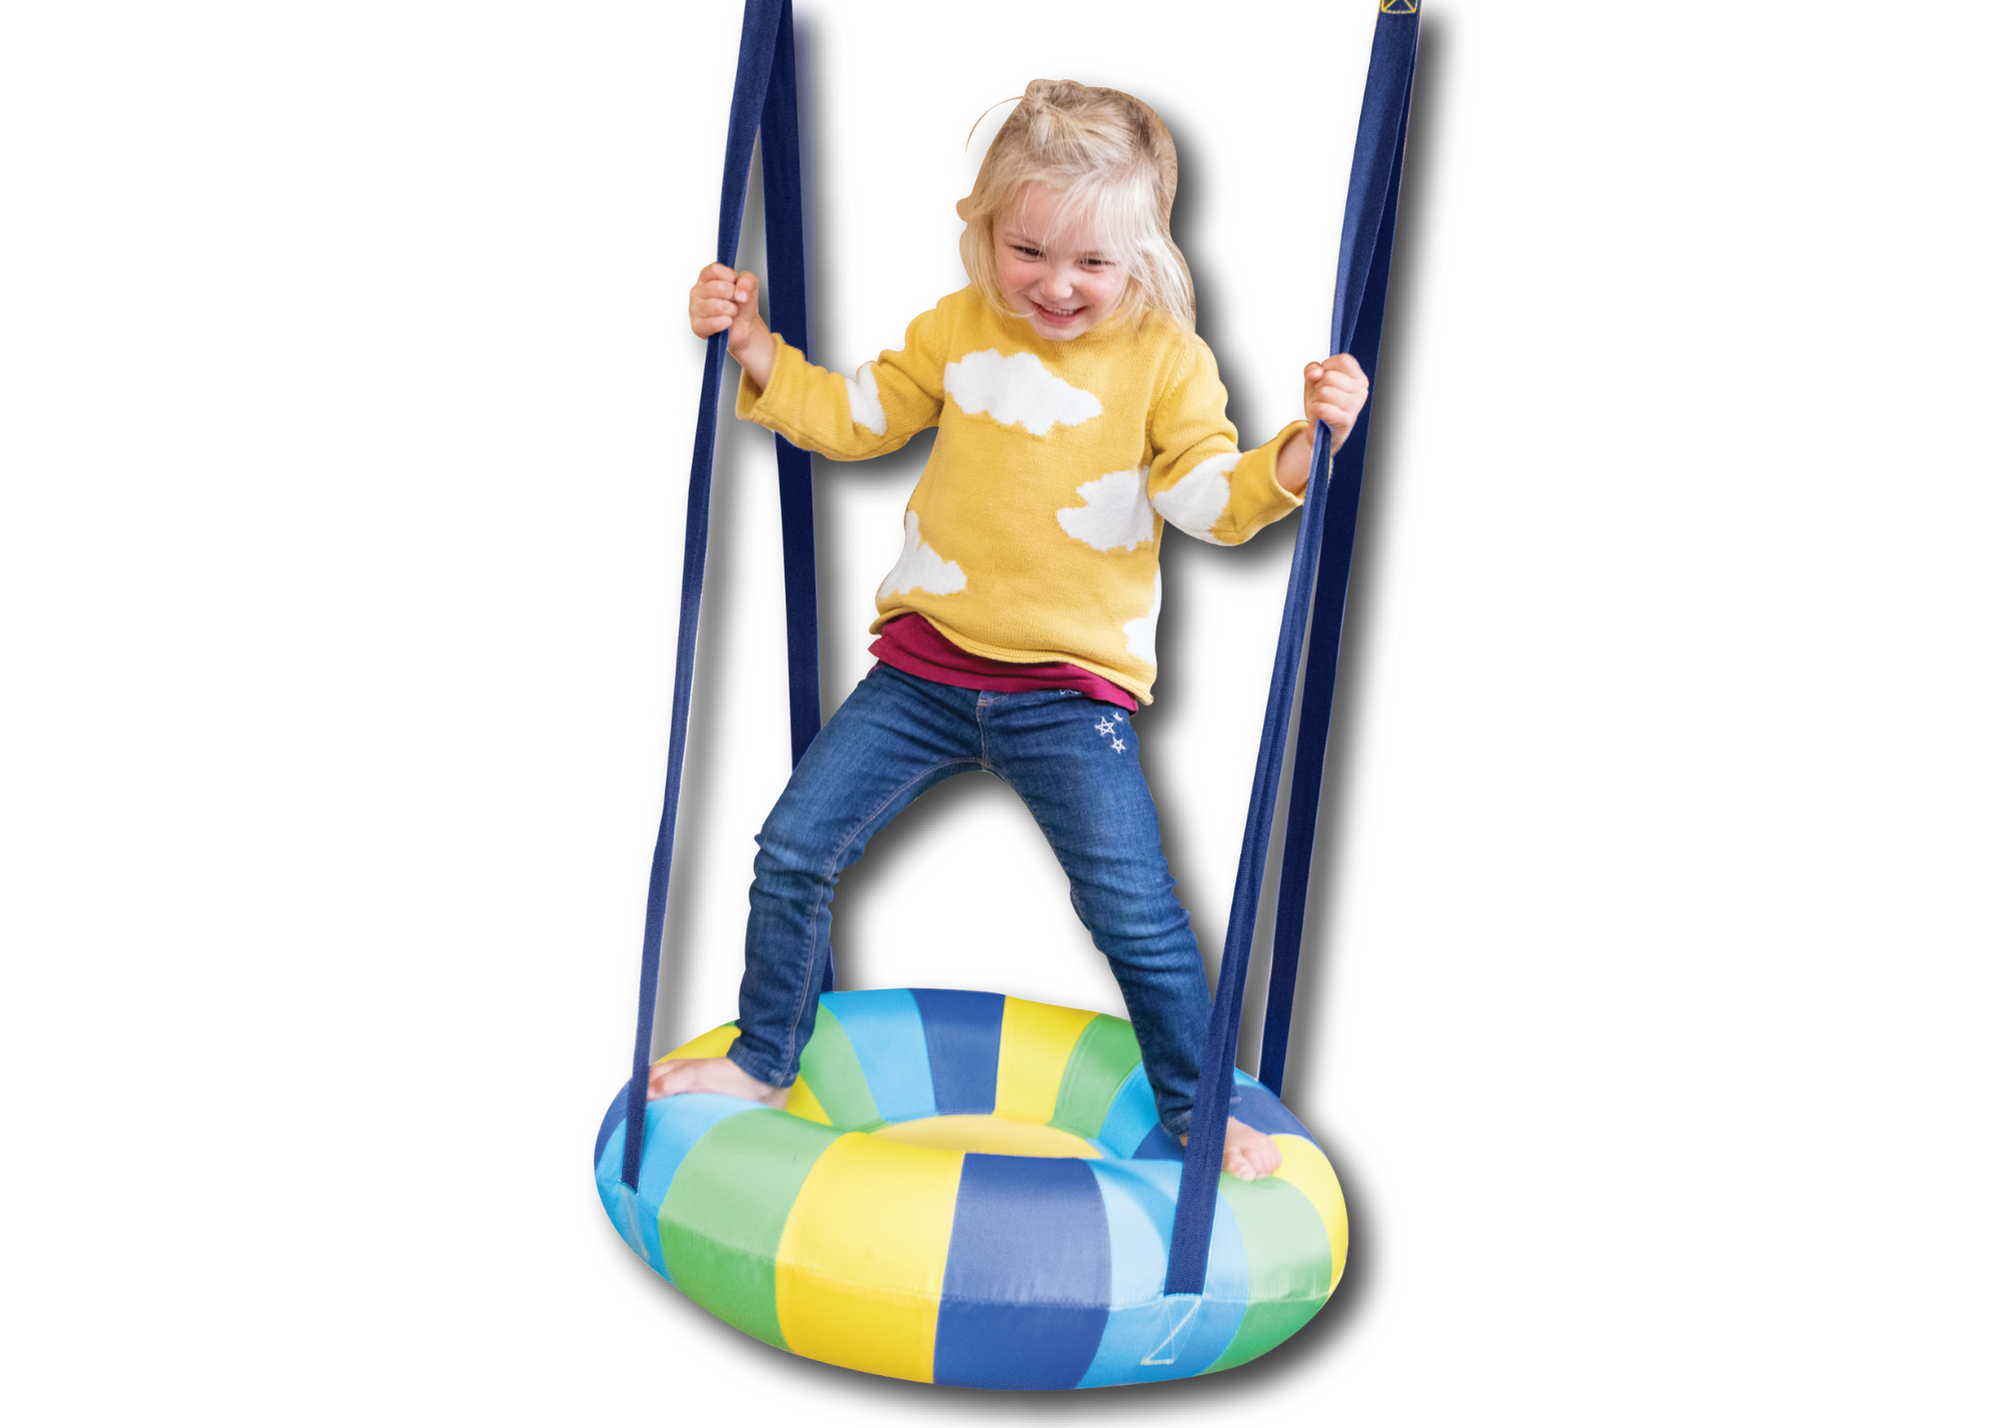 A child with light skin tone and blonde hair stands on top of the Cloud Swing. They are standing on the edges of the inflatable seat and holding onto two straps.